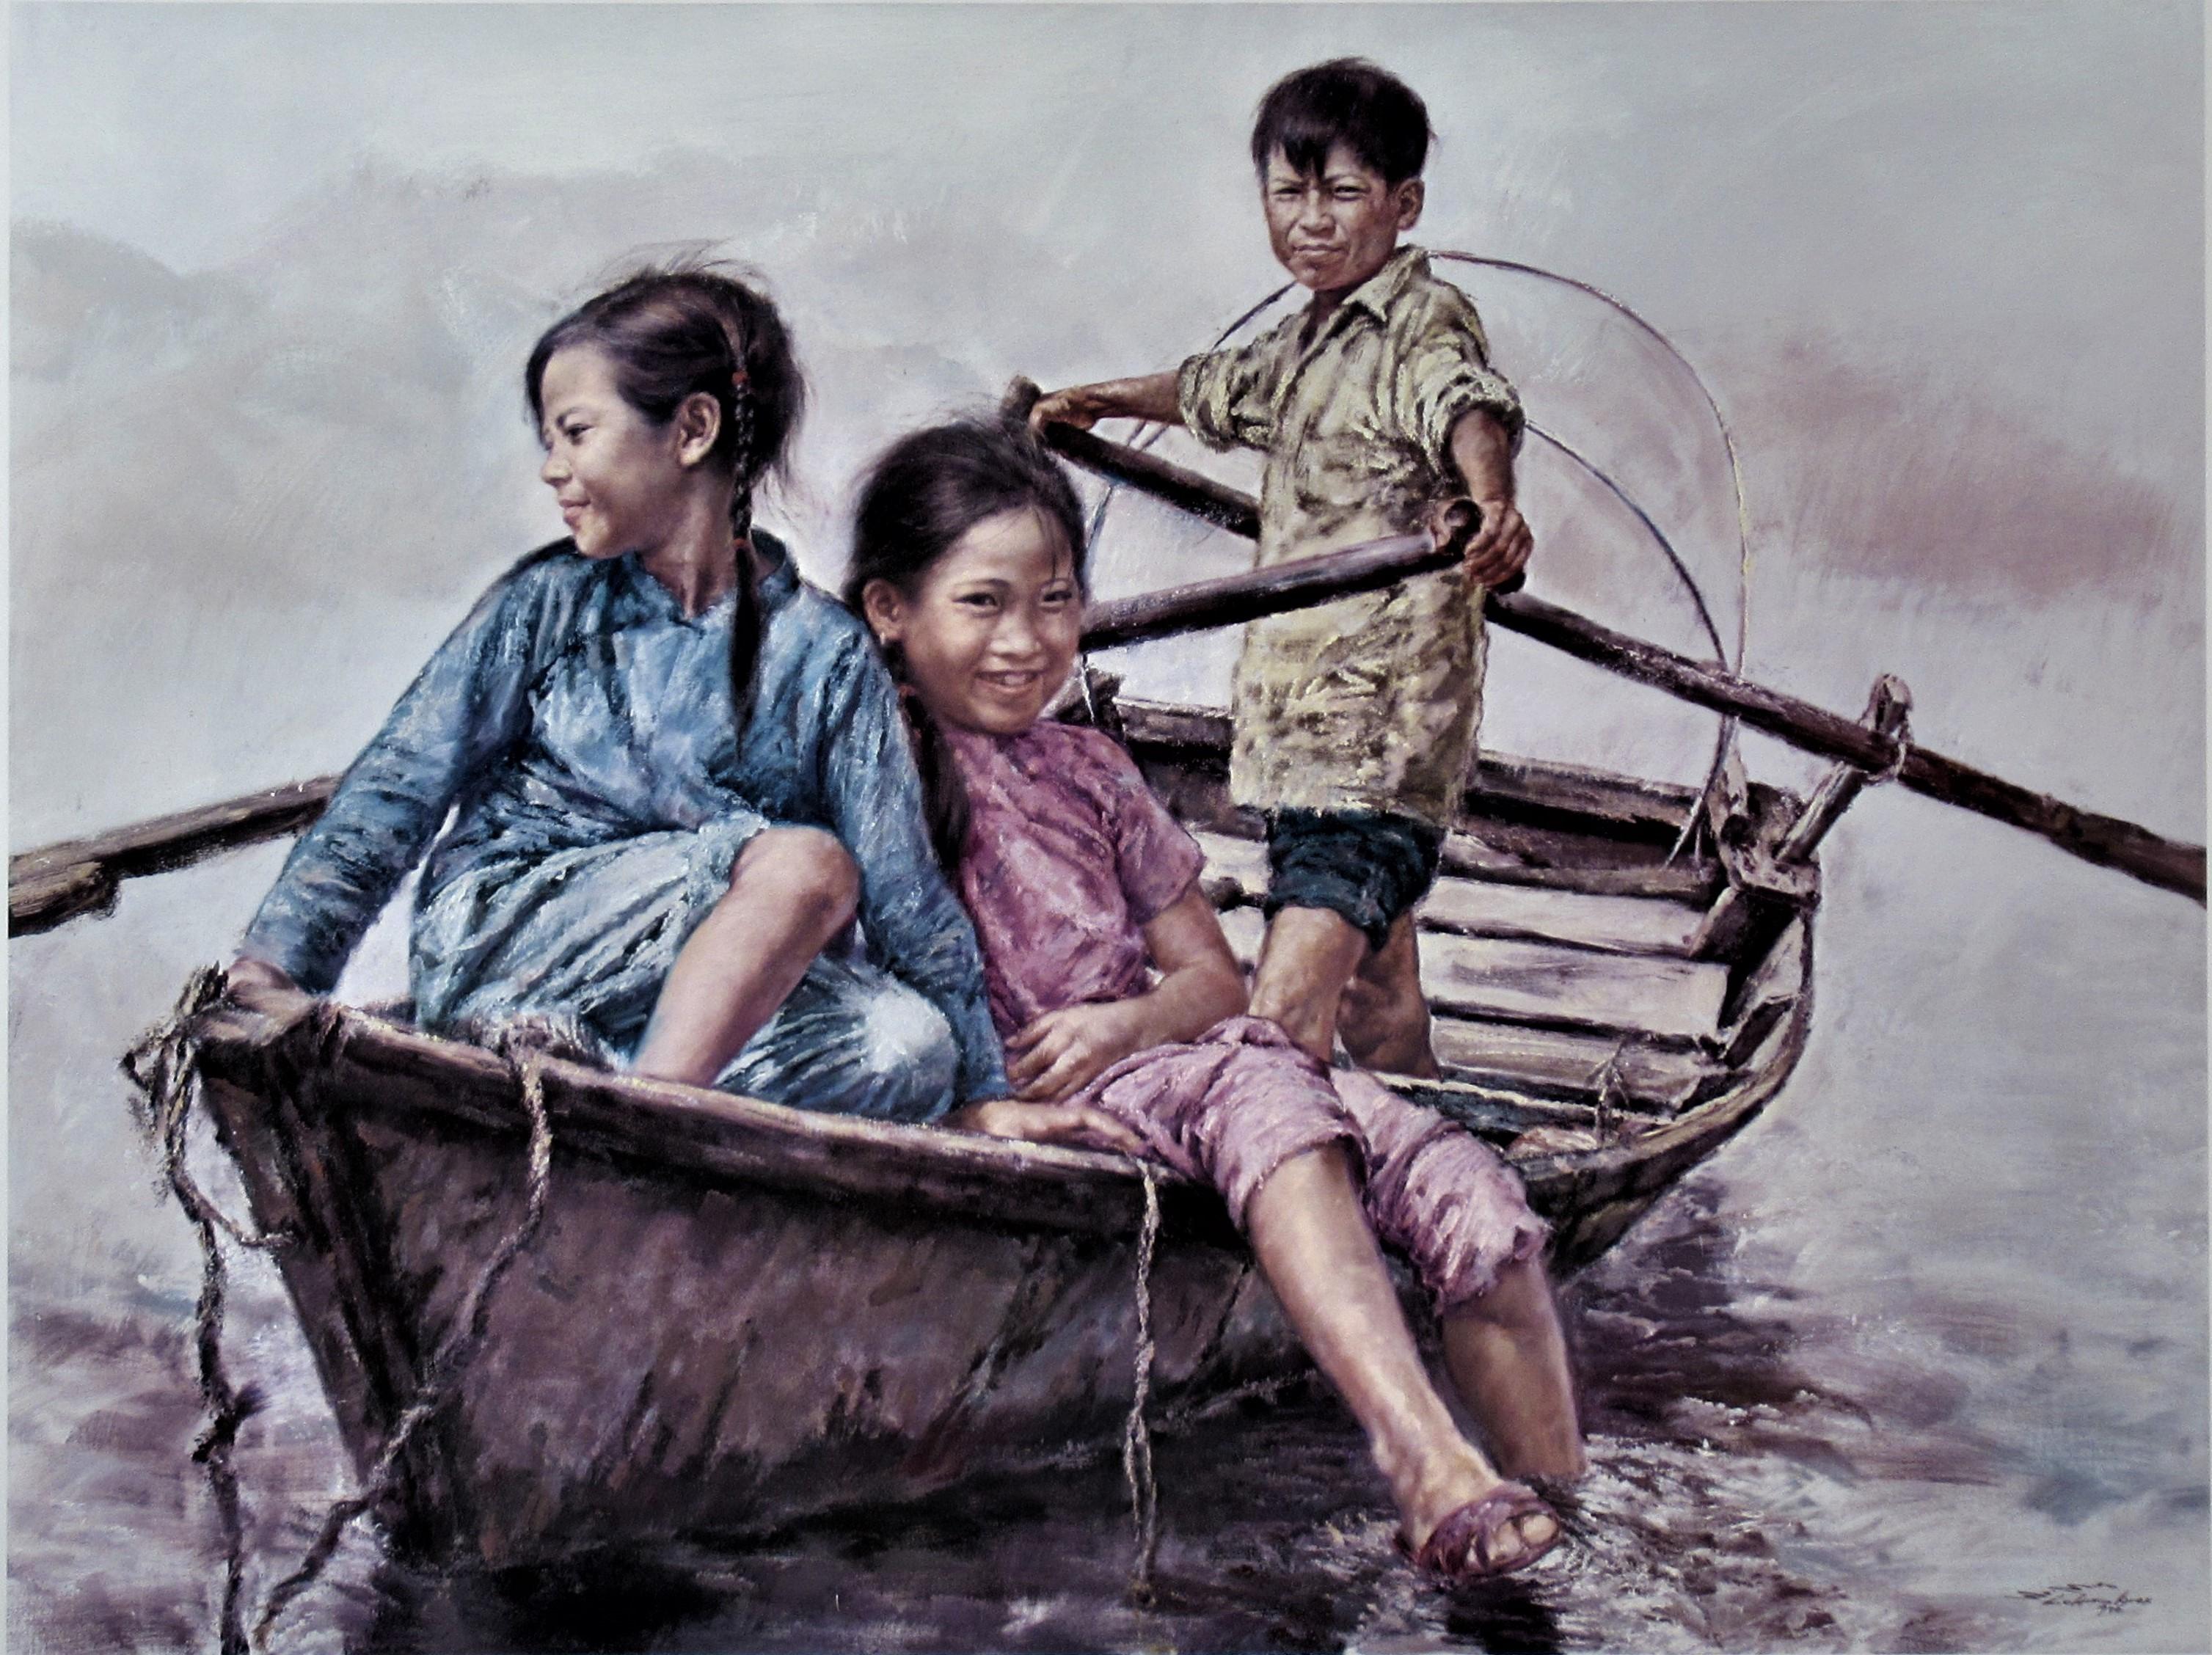 Children in a Boat - Print by Wai Ming (aka Lo Hing Kwok)